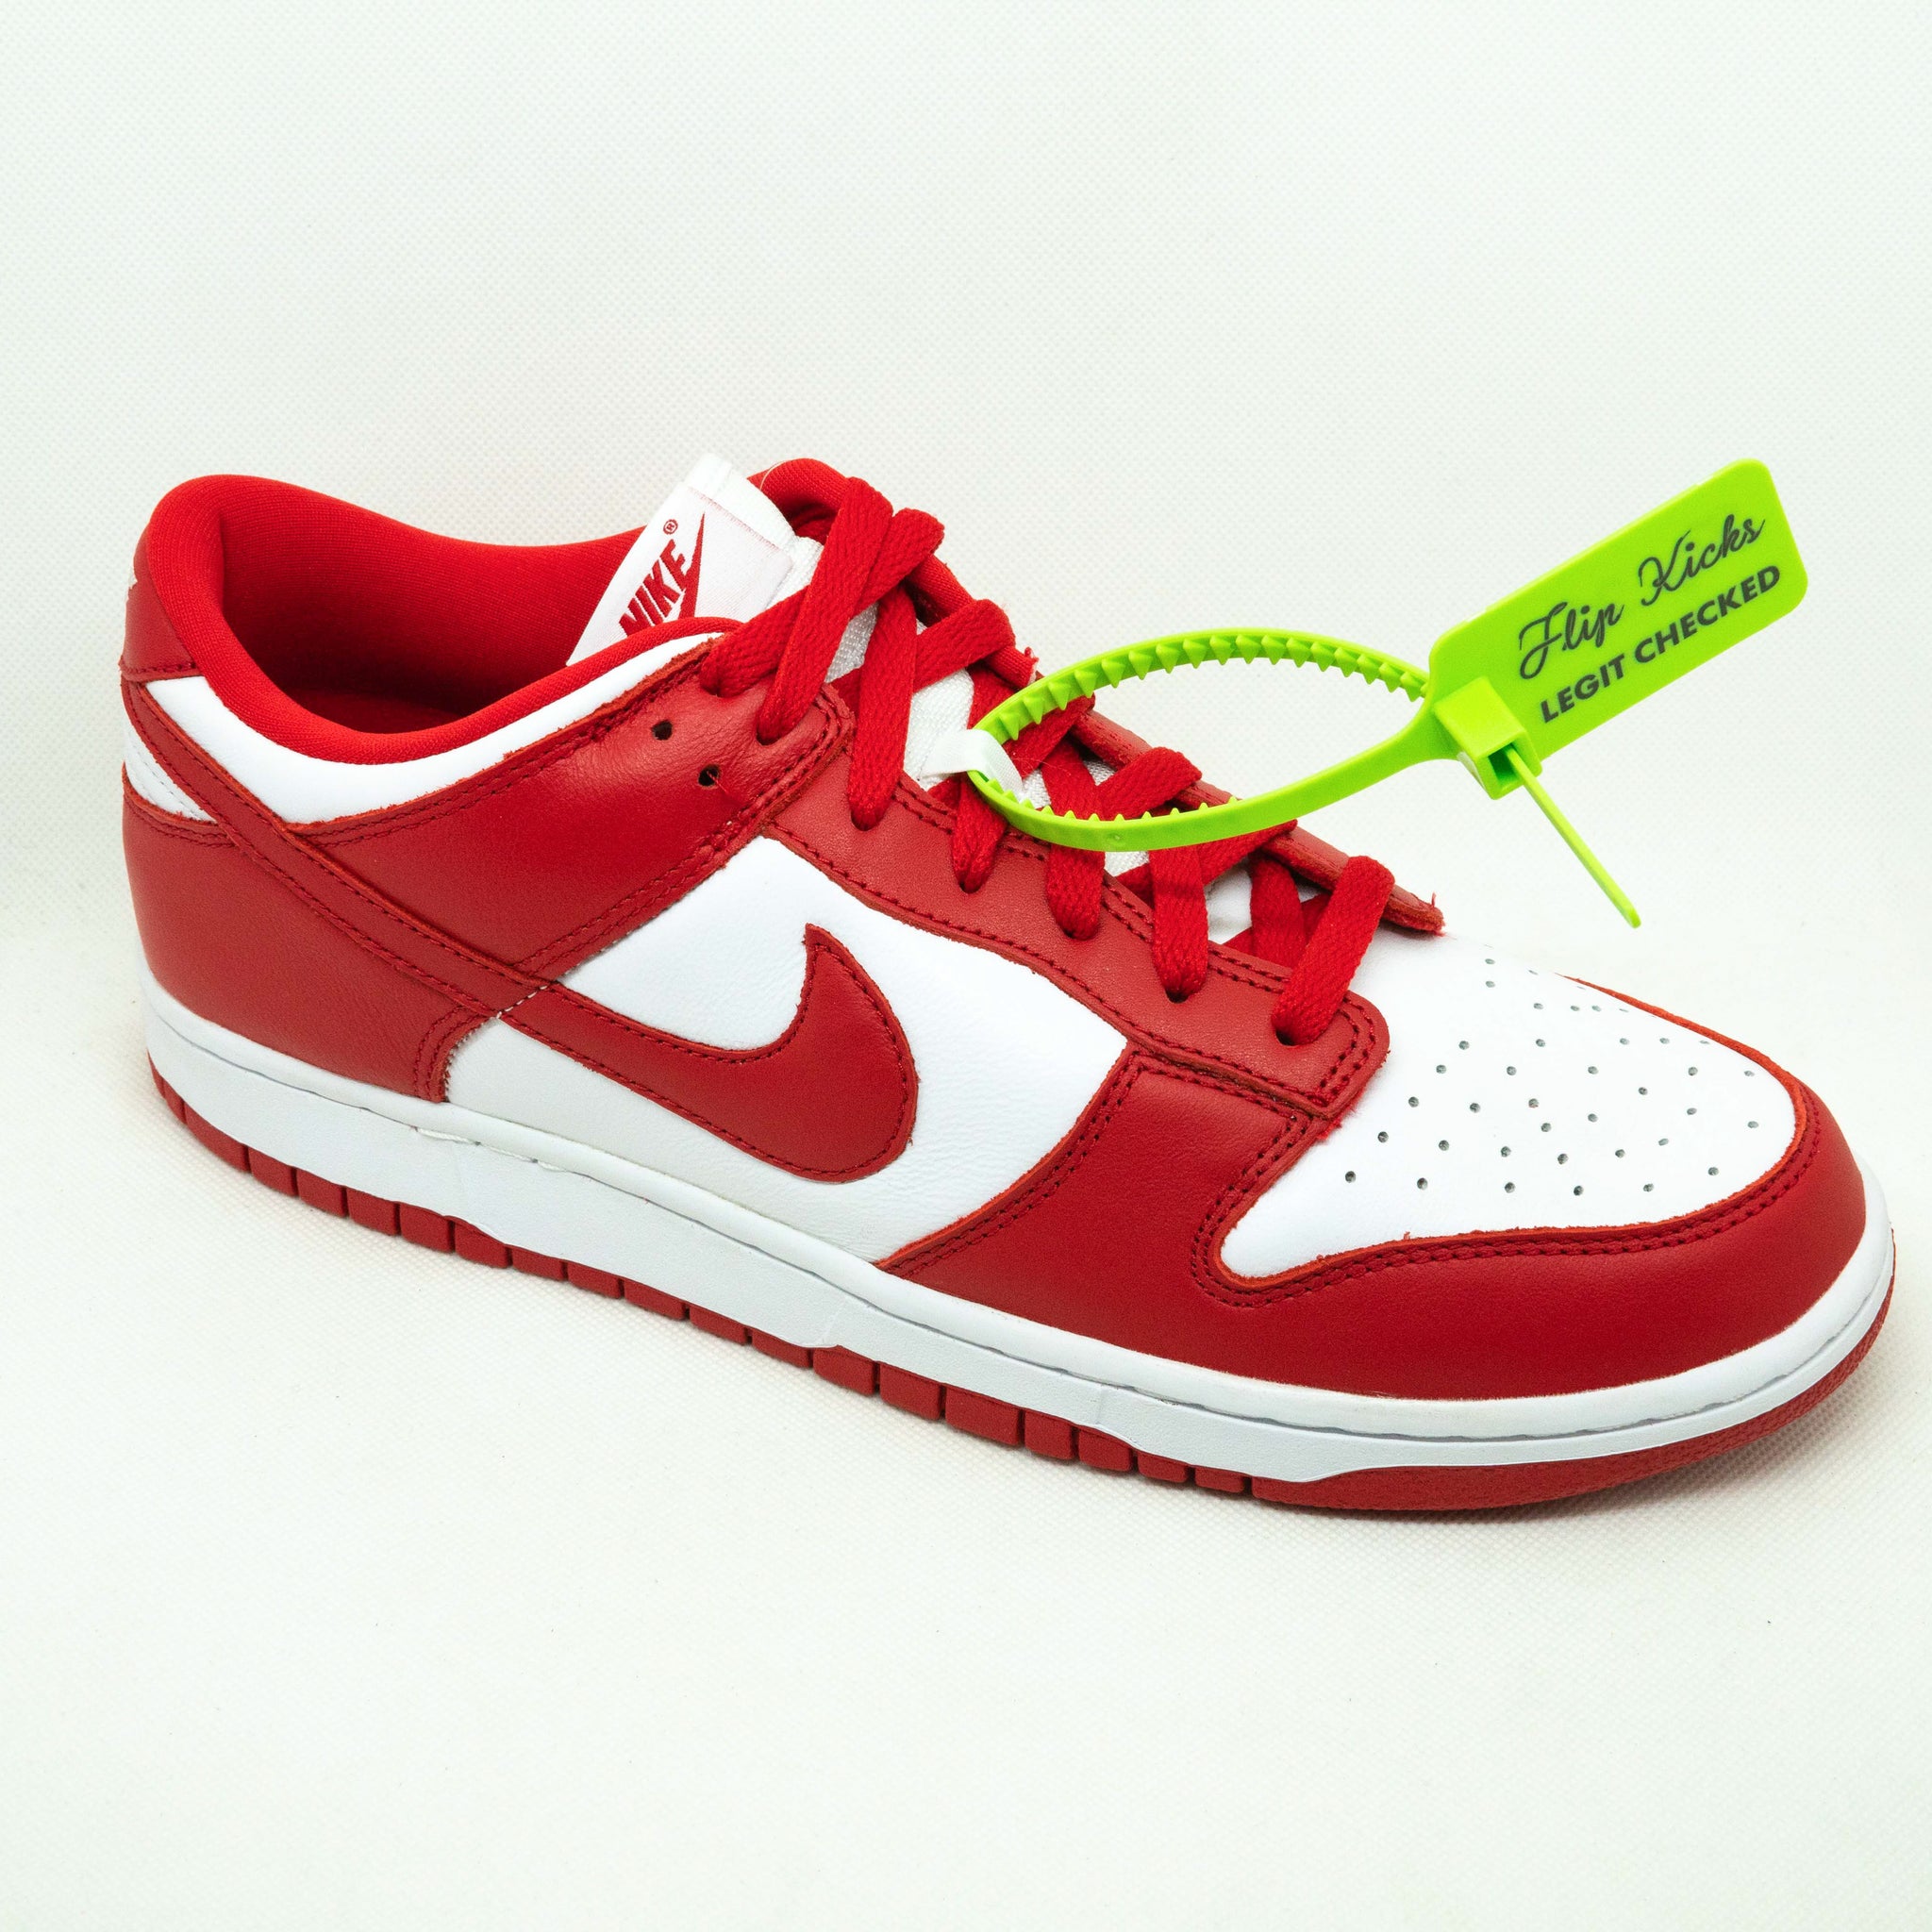 Dunk low UNIVERSITY RED